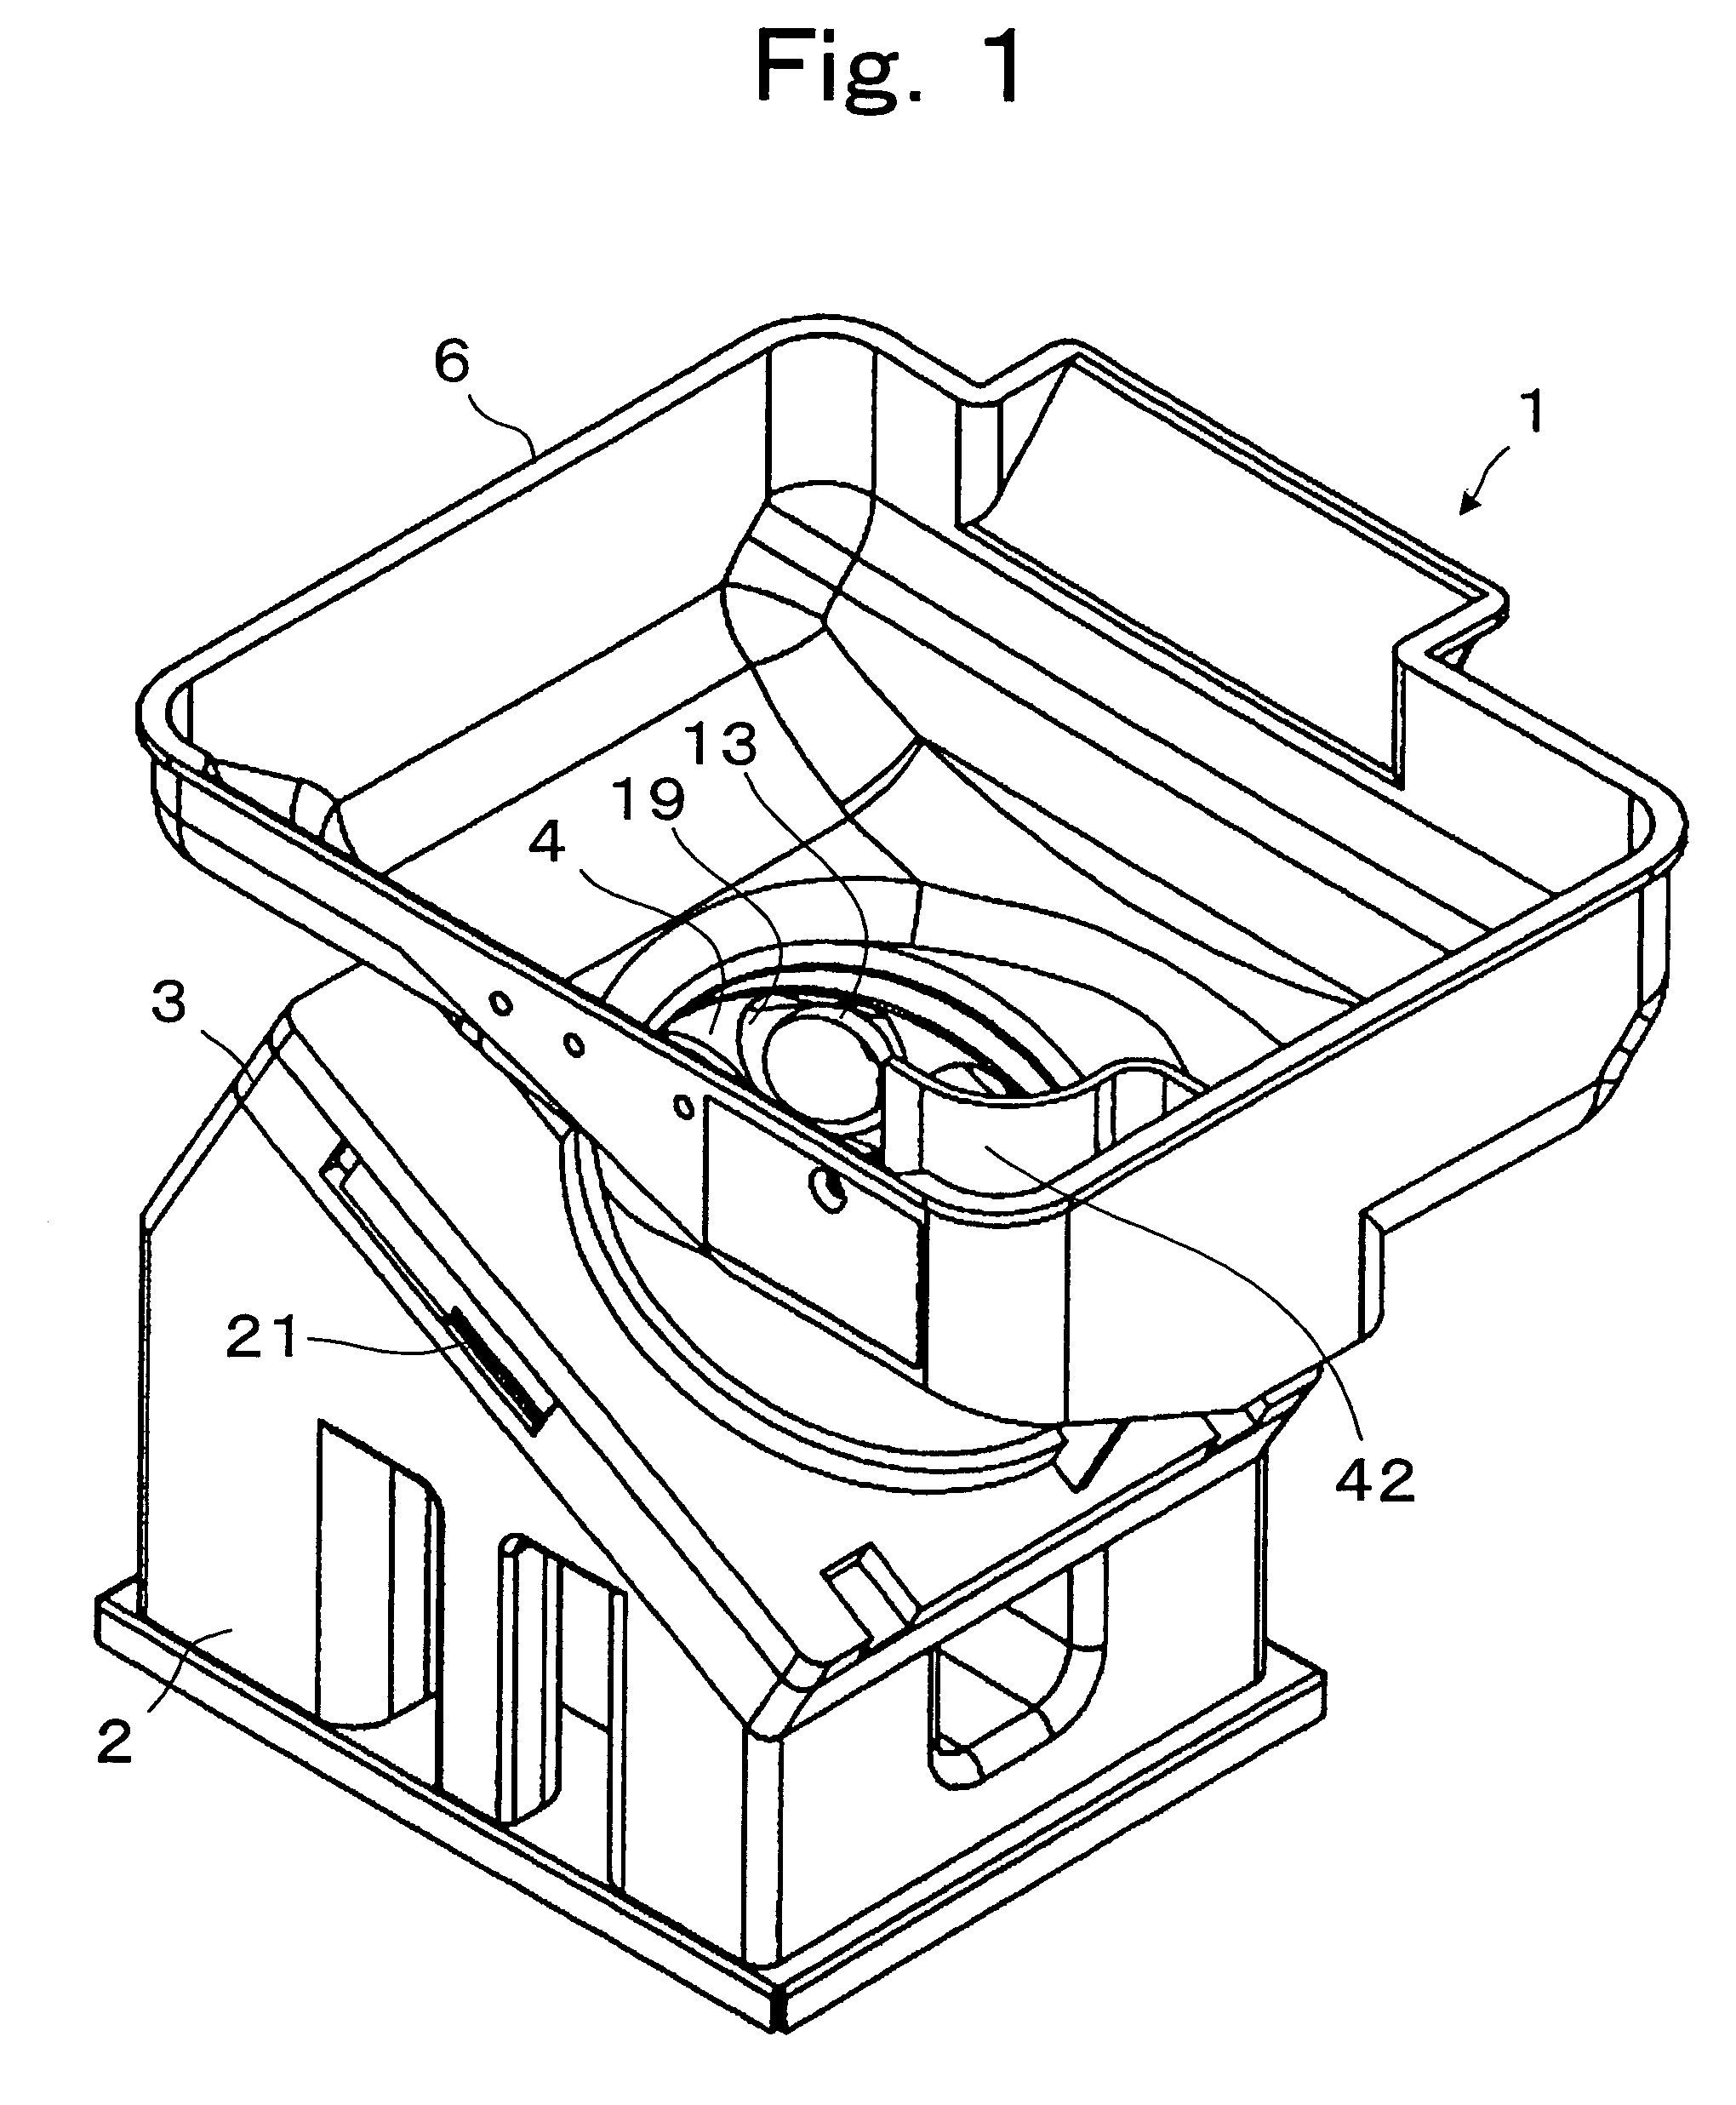 Token dispensing device with decreased loading on a token dispensing disk